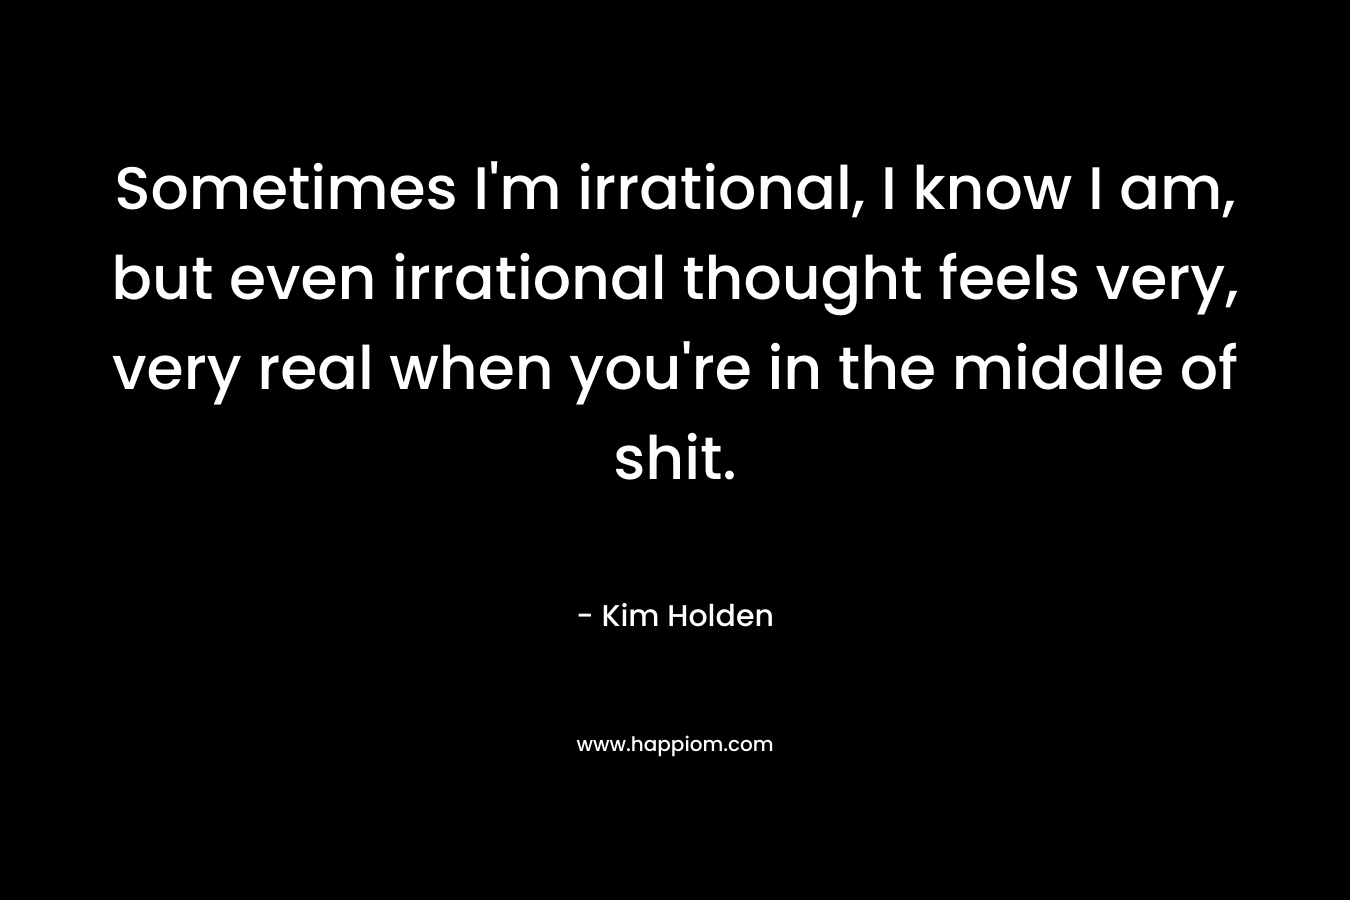 Sometimes I'm irrational, I know I am, but even irrational thought feels very, very real when you're in the middle of shit.